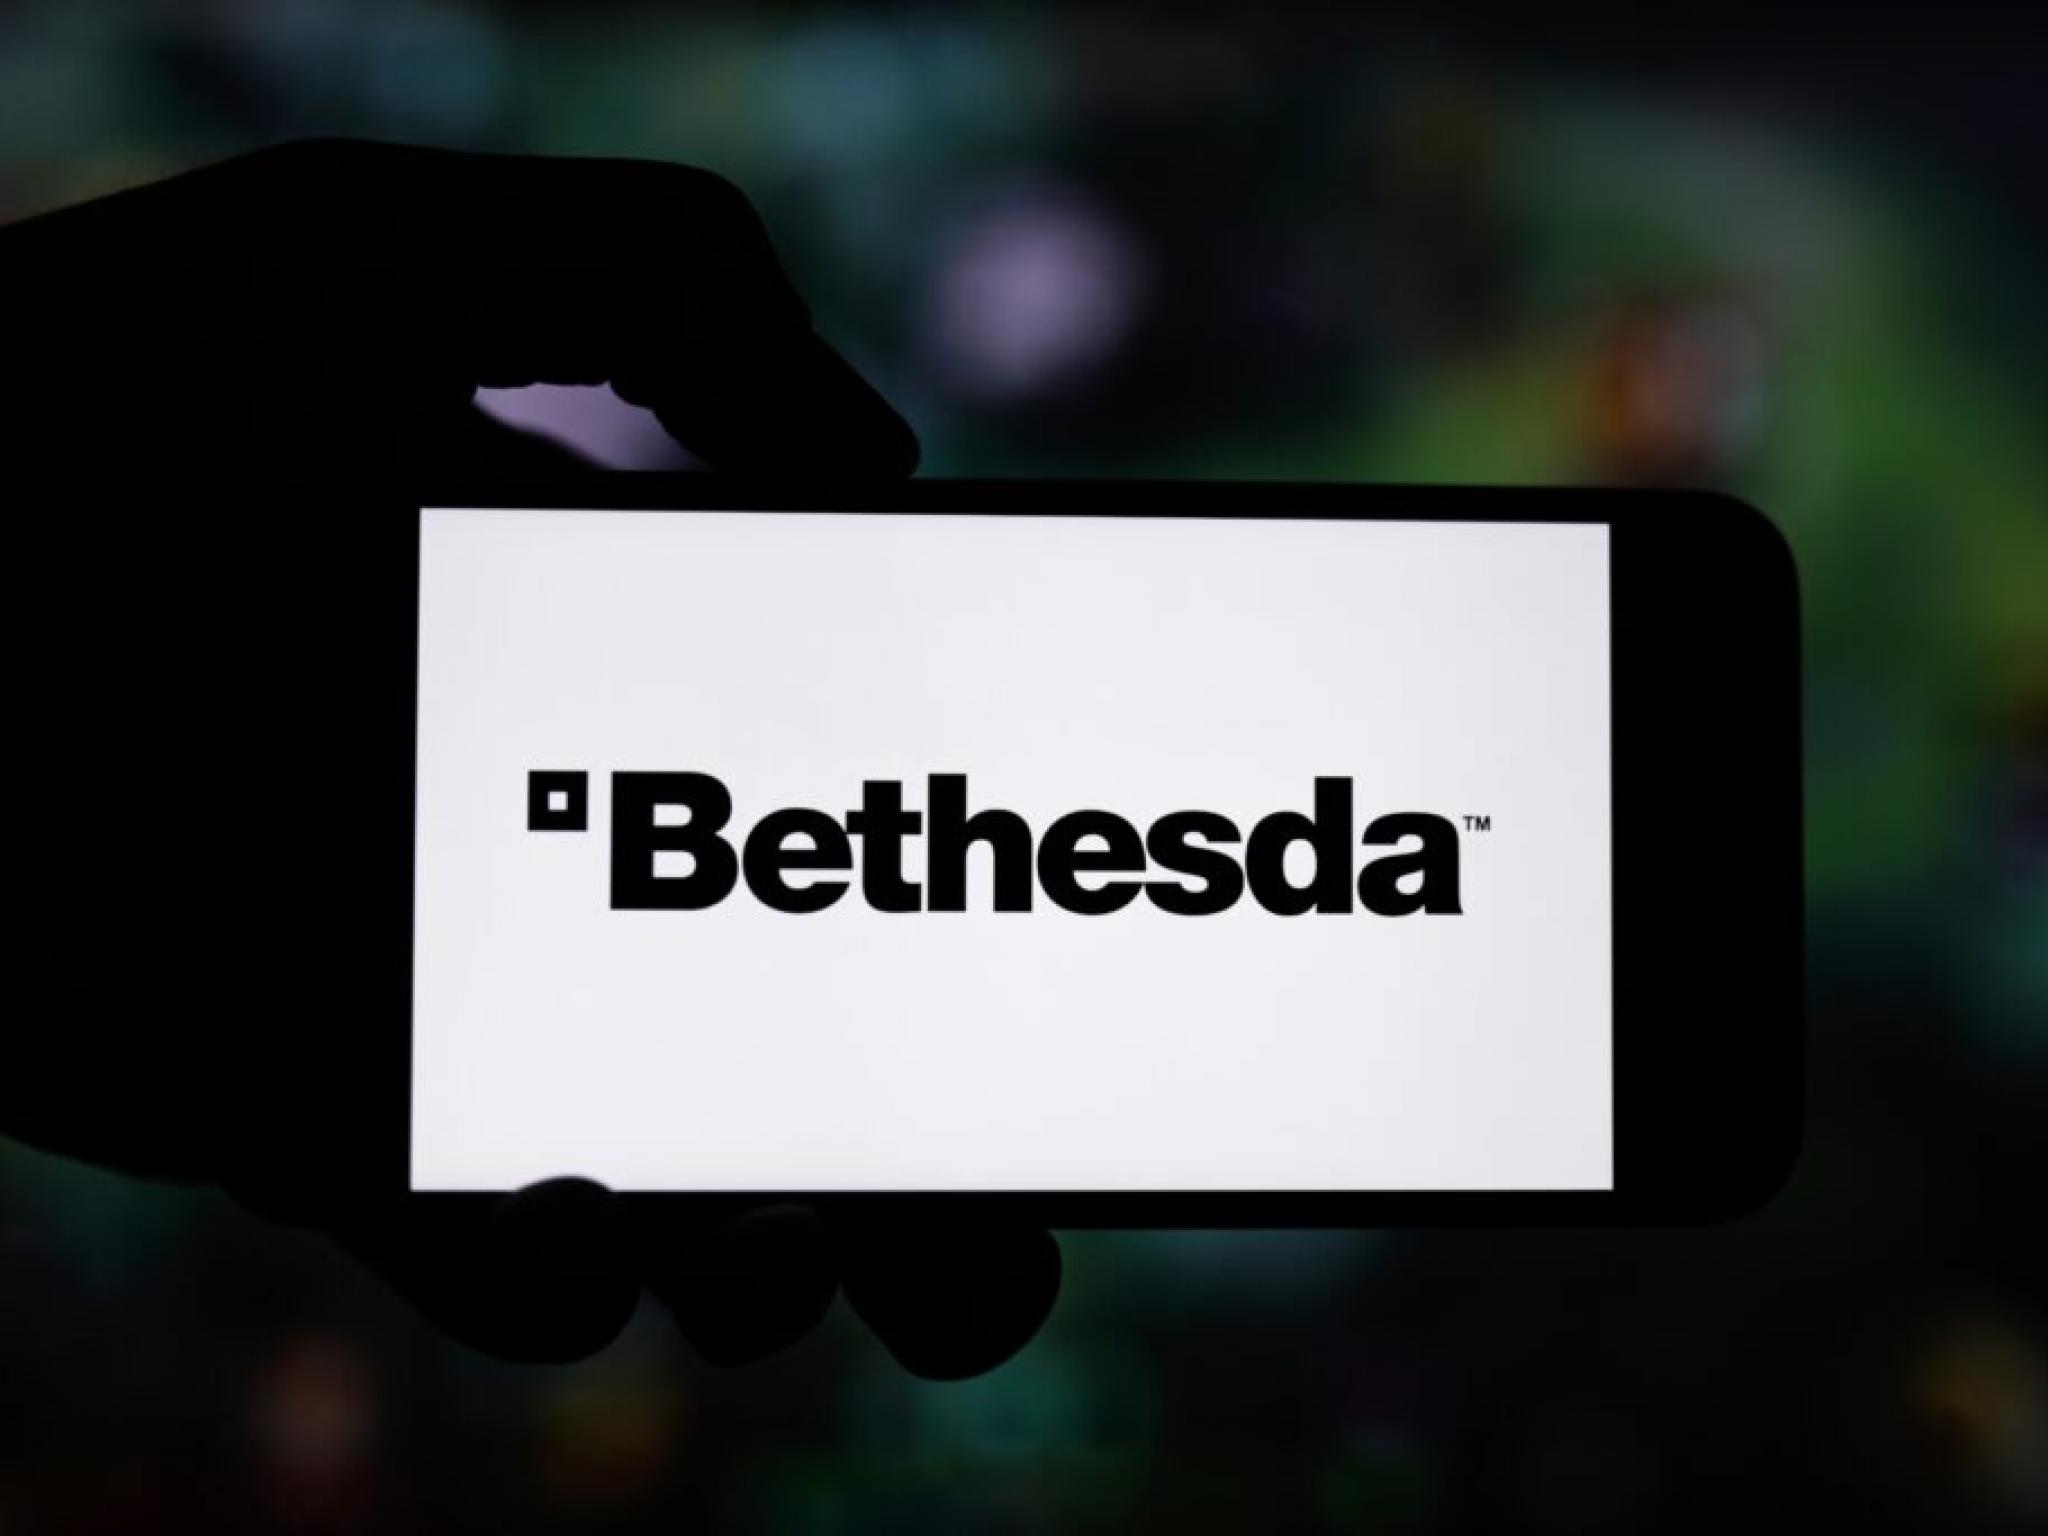  microsofts-xbox-closes-4-video-game-studios-in-bethesda-restructure 